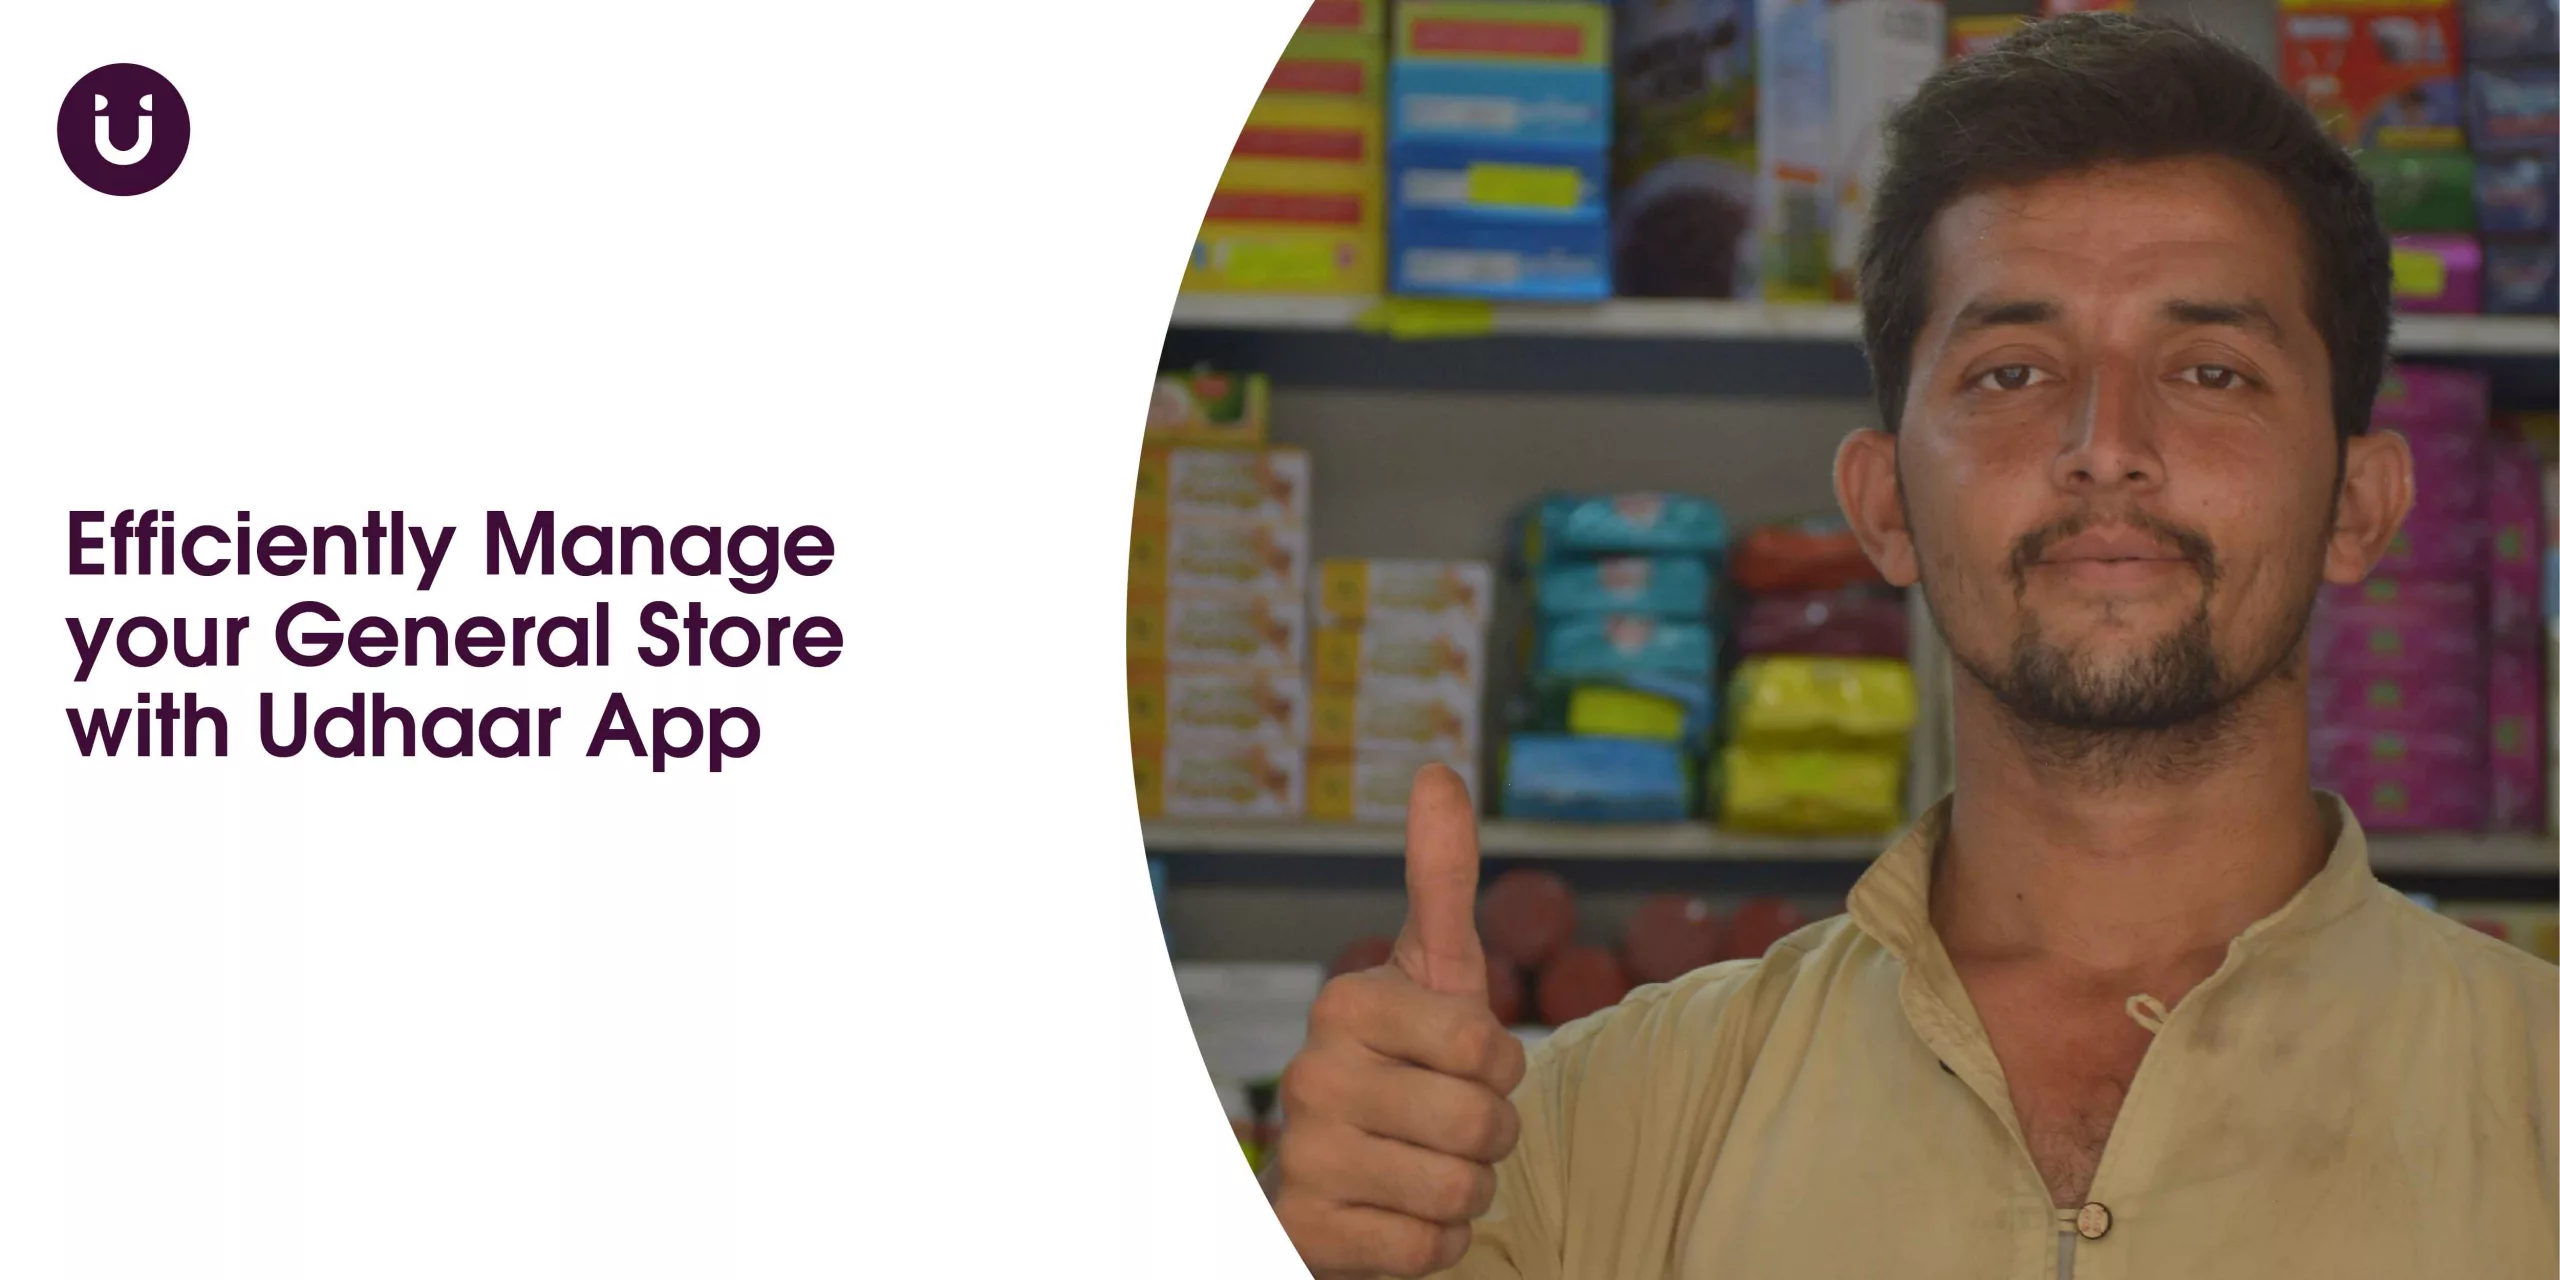 Efficiently Manage your General Store with Udhaar App